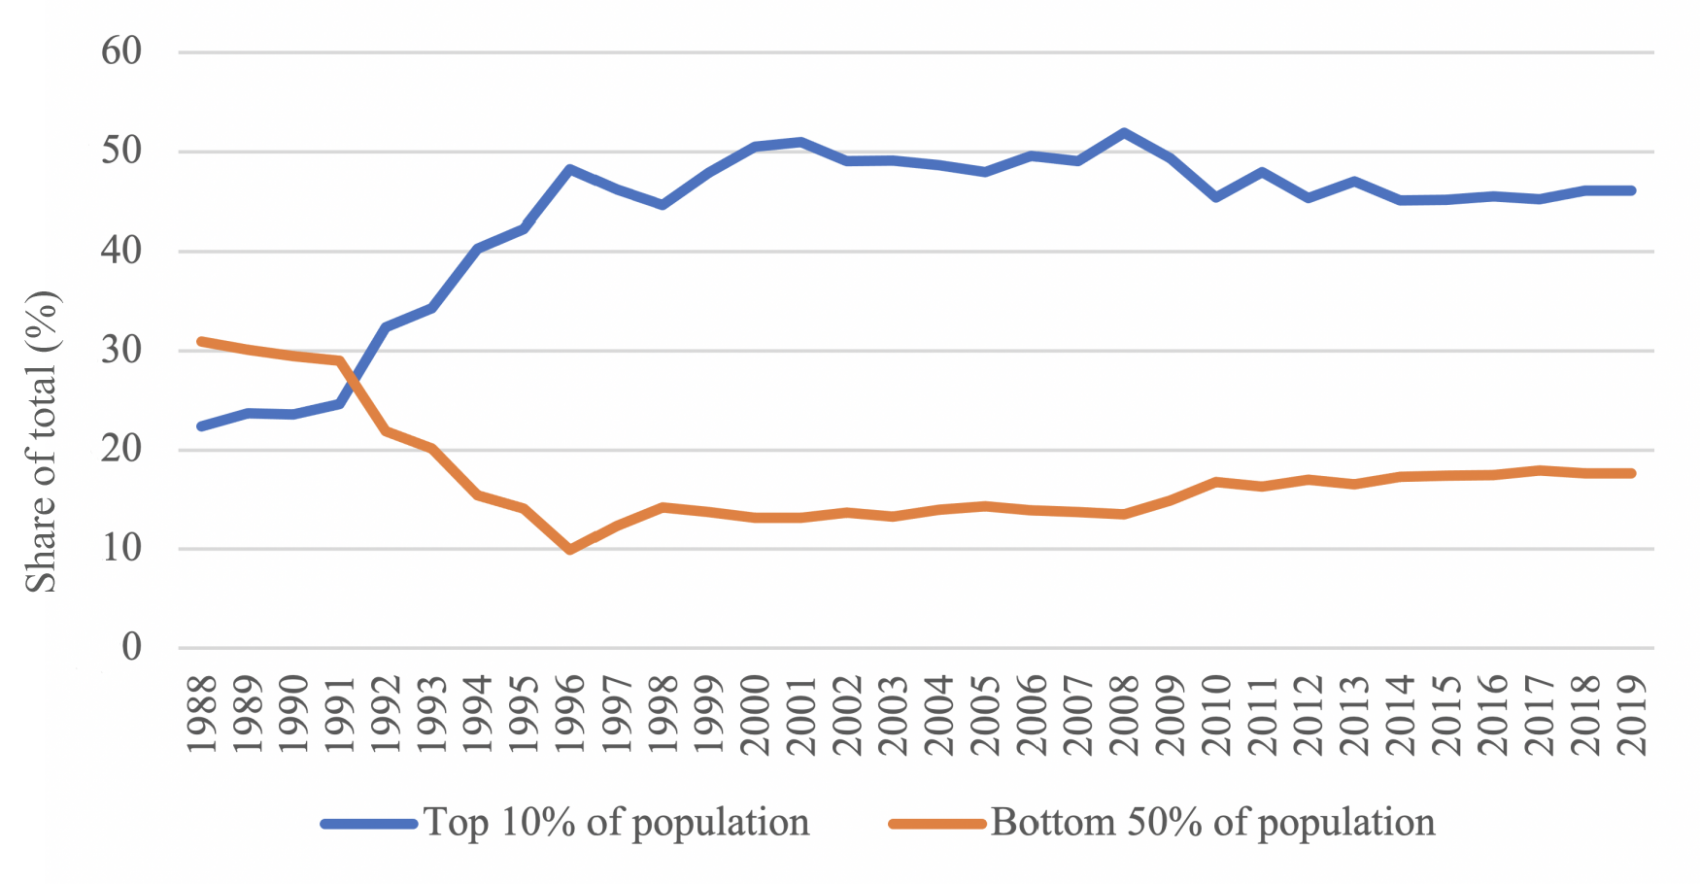 Line graph showing economic inequality in Russia from 1988 to 2019. After 1991, the top 10% of the population holds a vastly larger share of wealth than the bottom 50% of the population. By 2019 46% of the Russian national income belonged to the top 10% and only 18% of the national income to the bottom 50%.